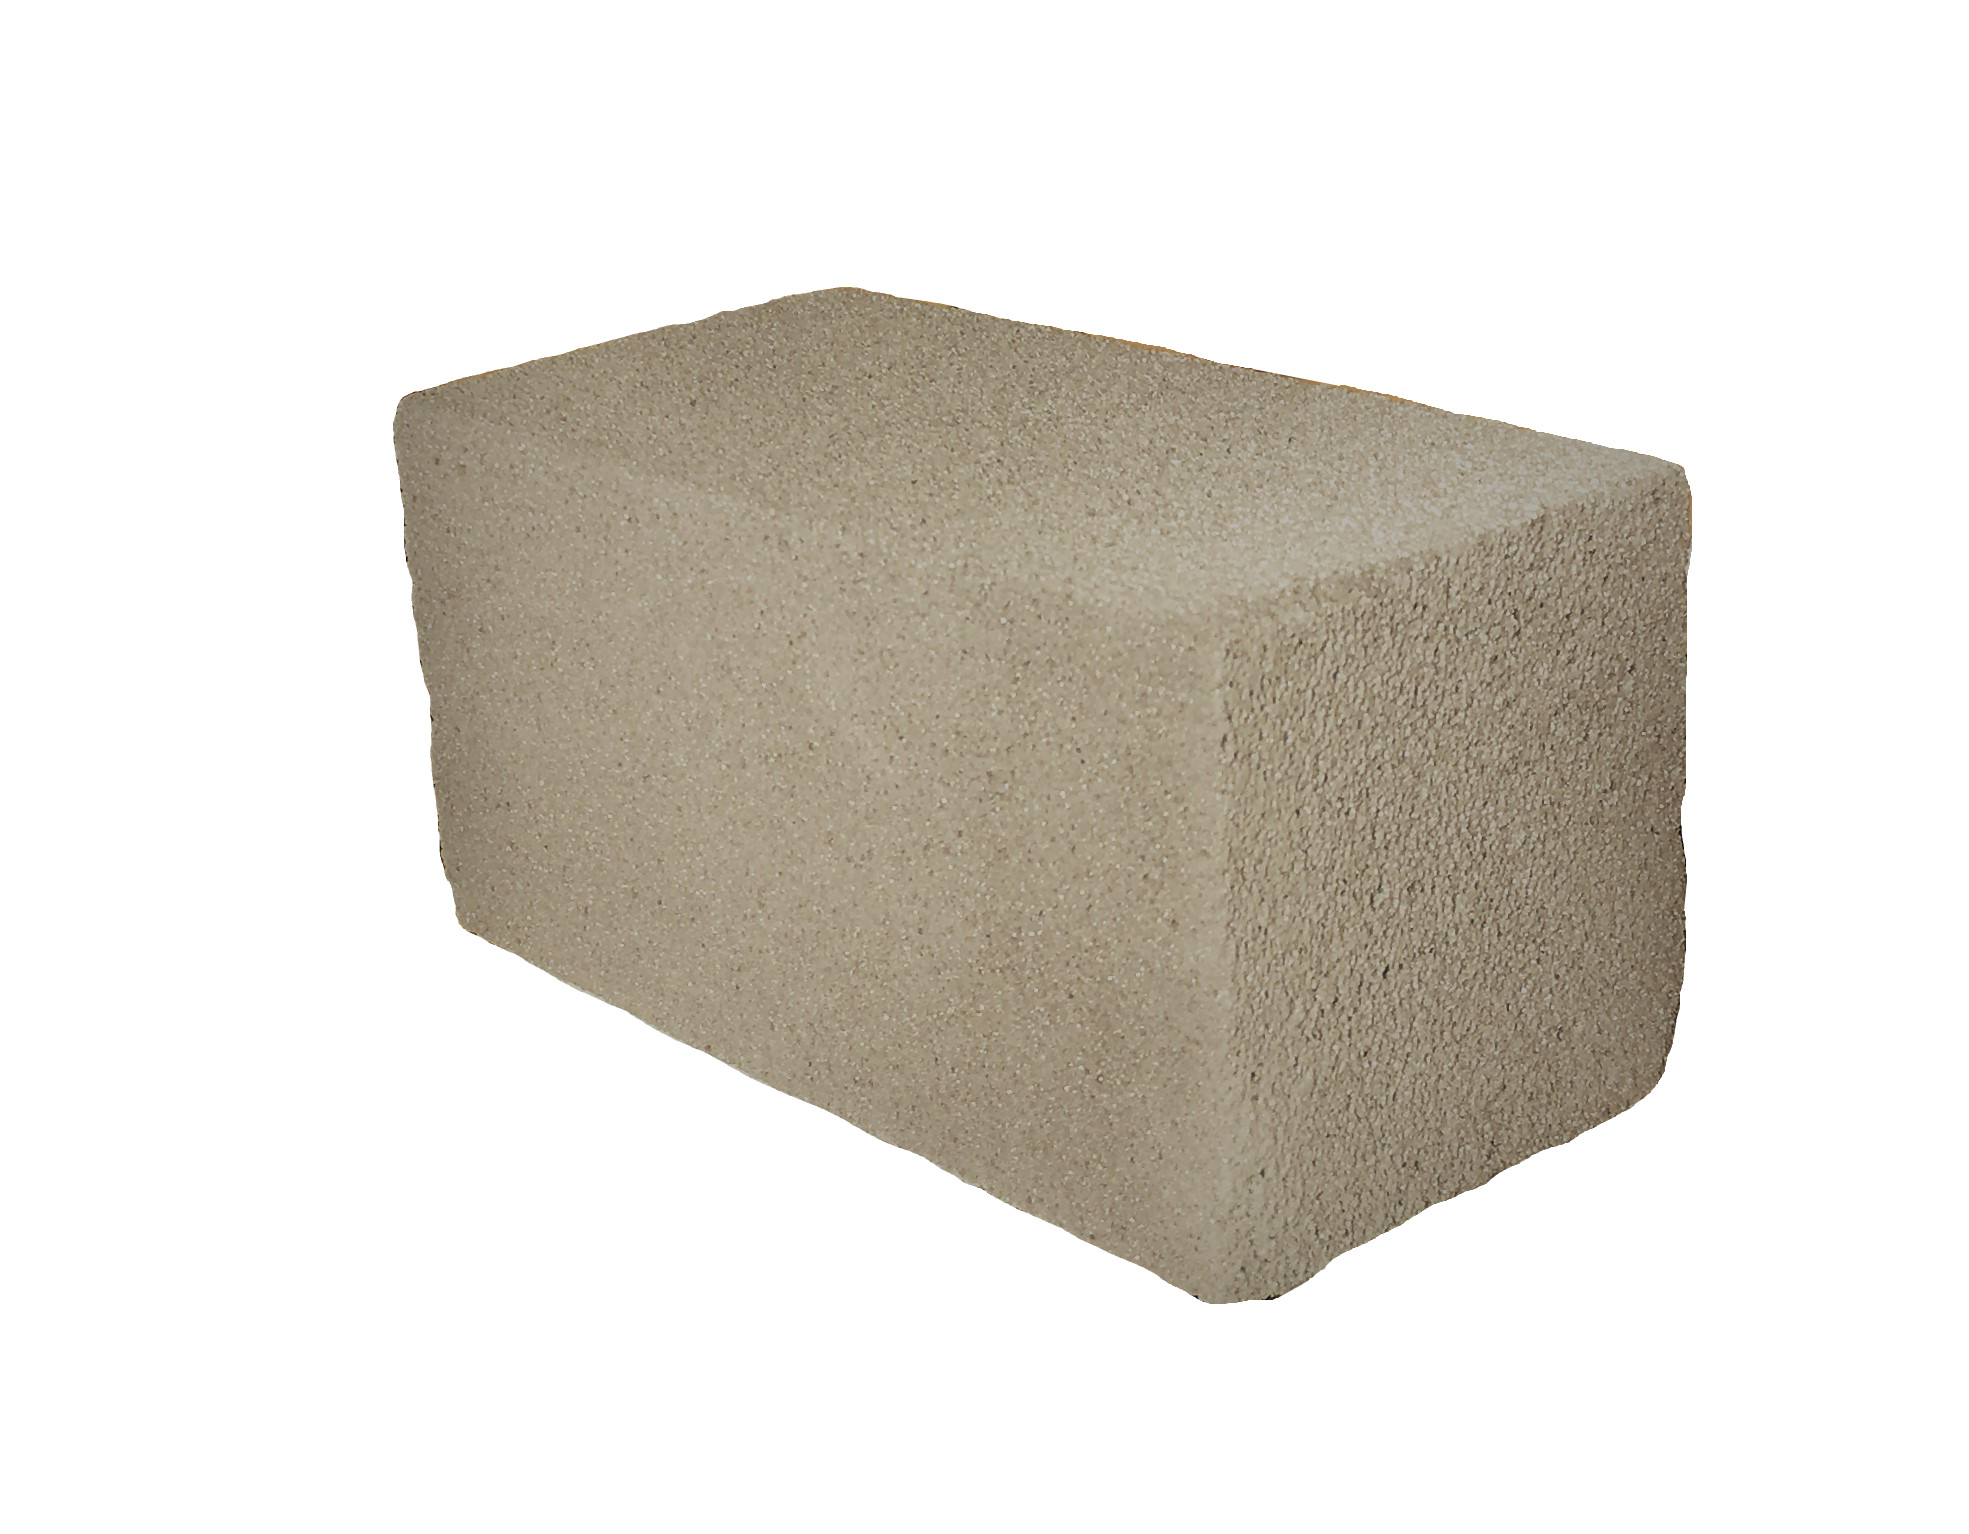 Pumice Cleaning Stone / Grillstone